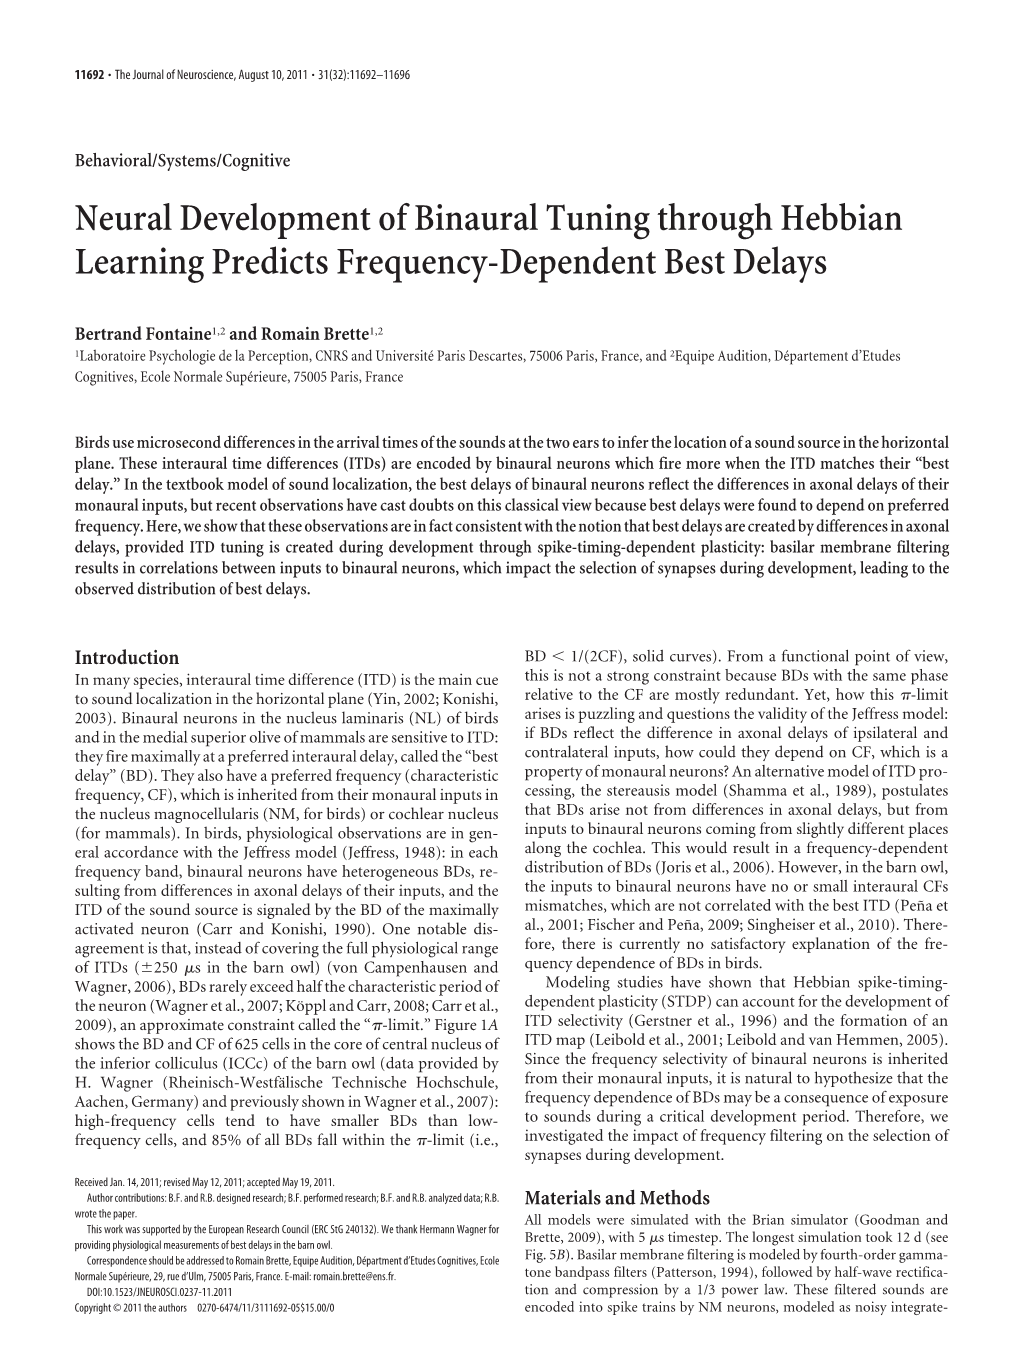 Neural Development of Binaural Tuning Through Hebbian Learning Predicts Frequency-Dependent Best Delays